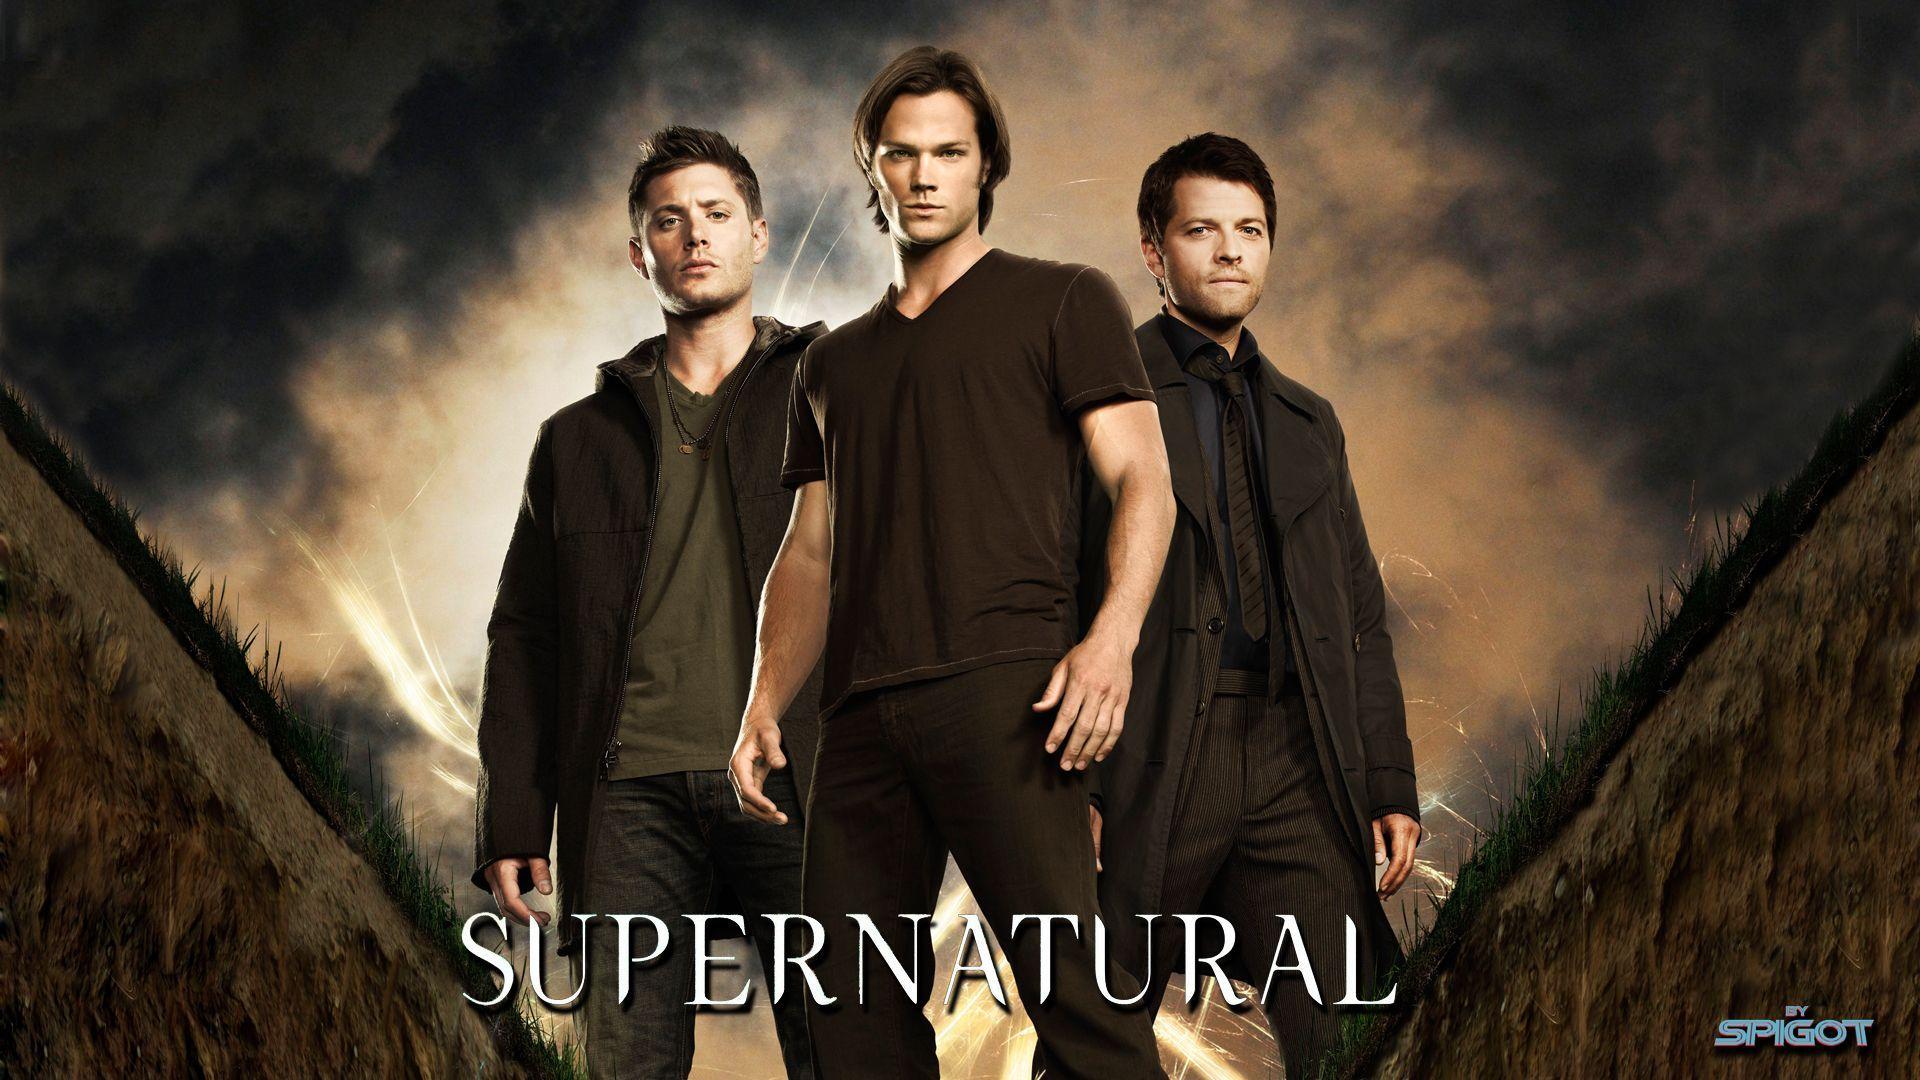 Supernatural Wallpaper Wallpaper Background of Your Choice